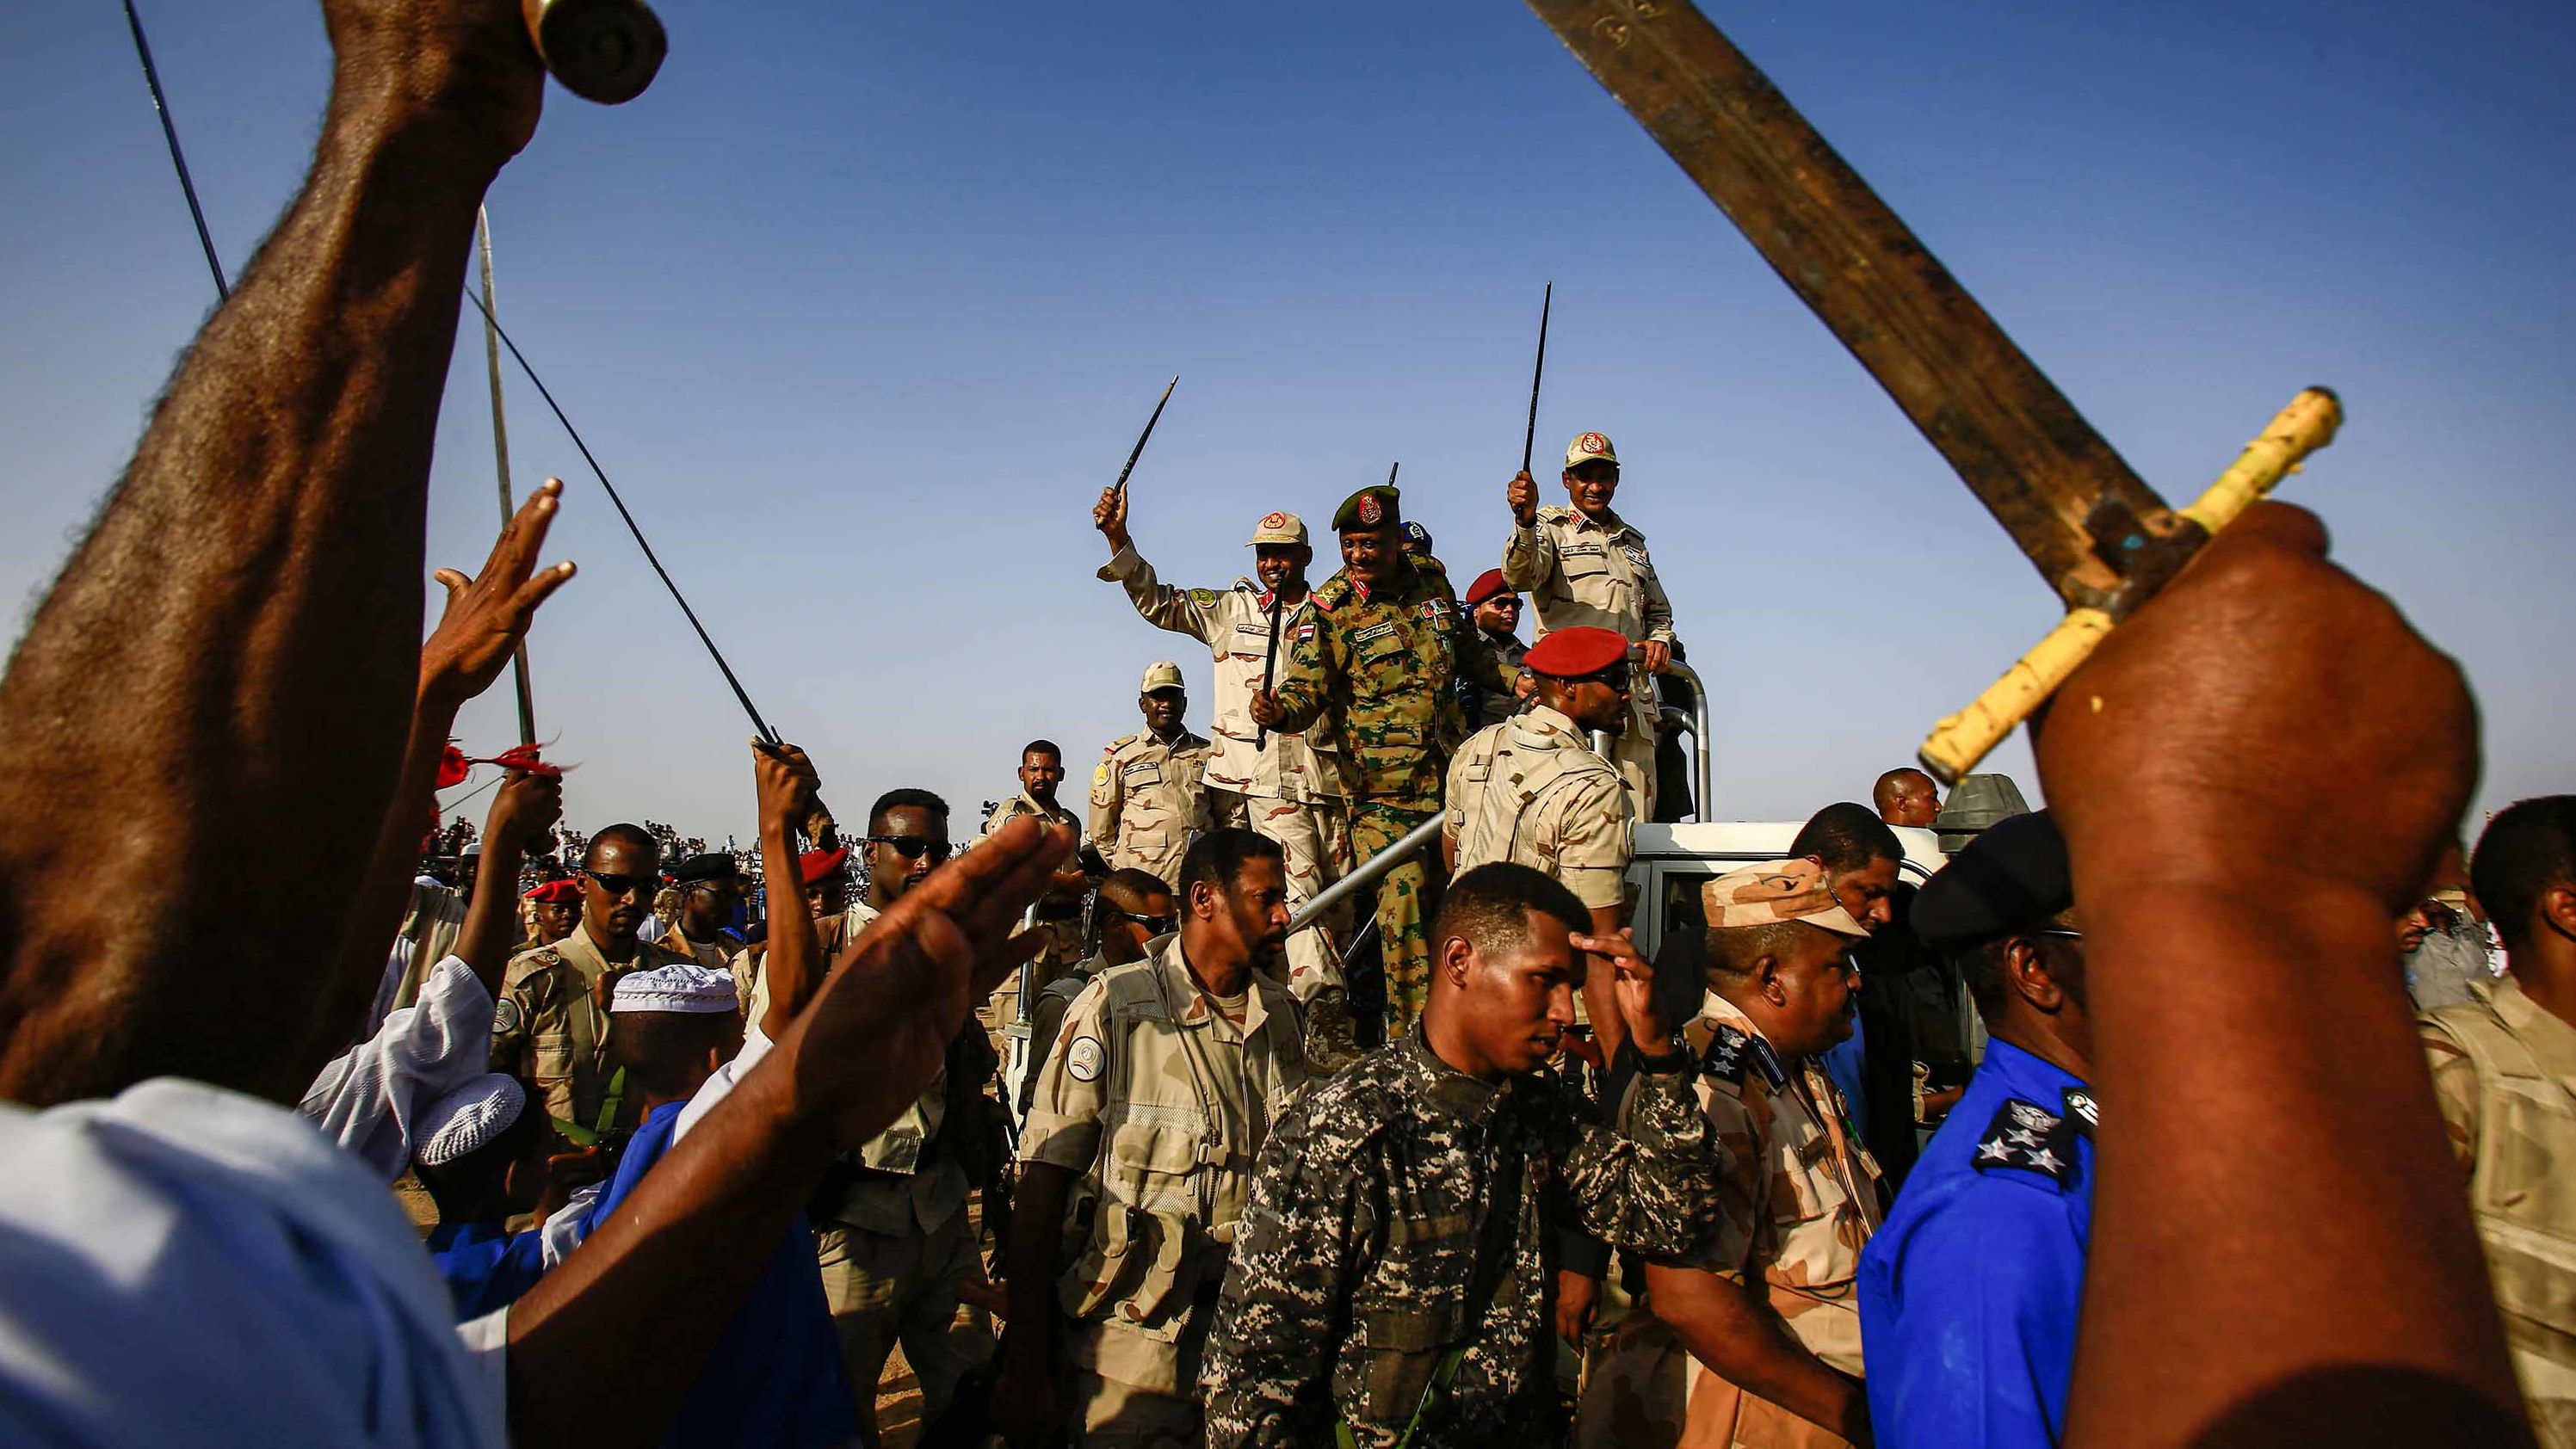 Mohamed Hamdan Dagalo, deputy head of Sudan's ruling Transitional Military Council (TMC) and commander of the Rapid Support Forces (RSF) paramilitaries, center right, waves a baton as he rides through supporters in Qarri, north of Khartoum, on June 15.